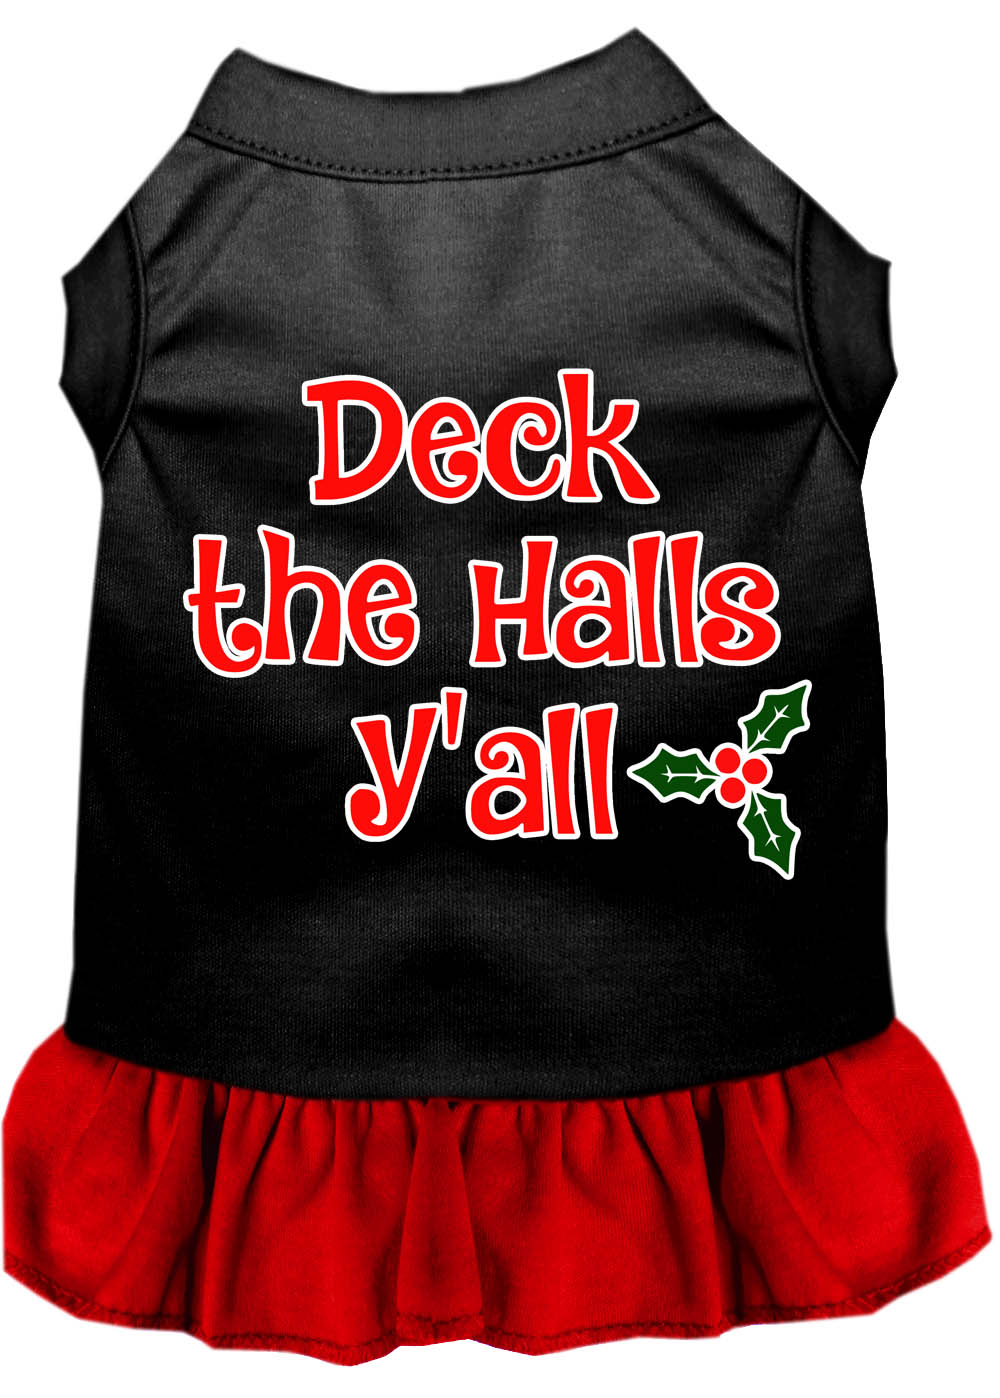 Deck the Halls Y'all Screen Print Dog Dress Black with Red Sm